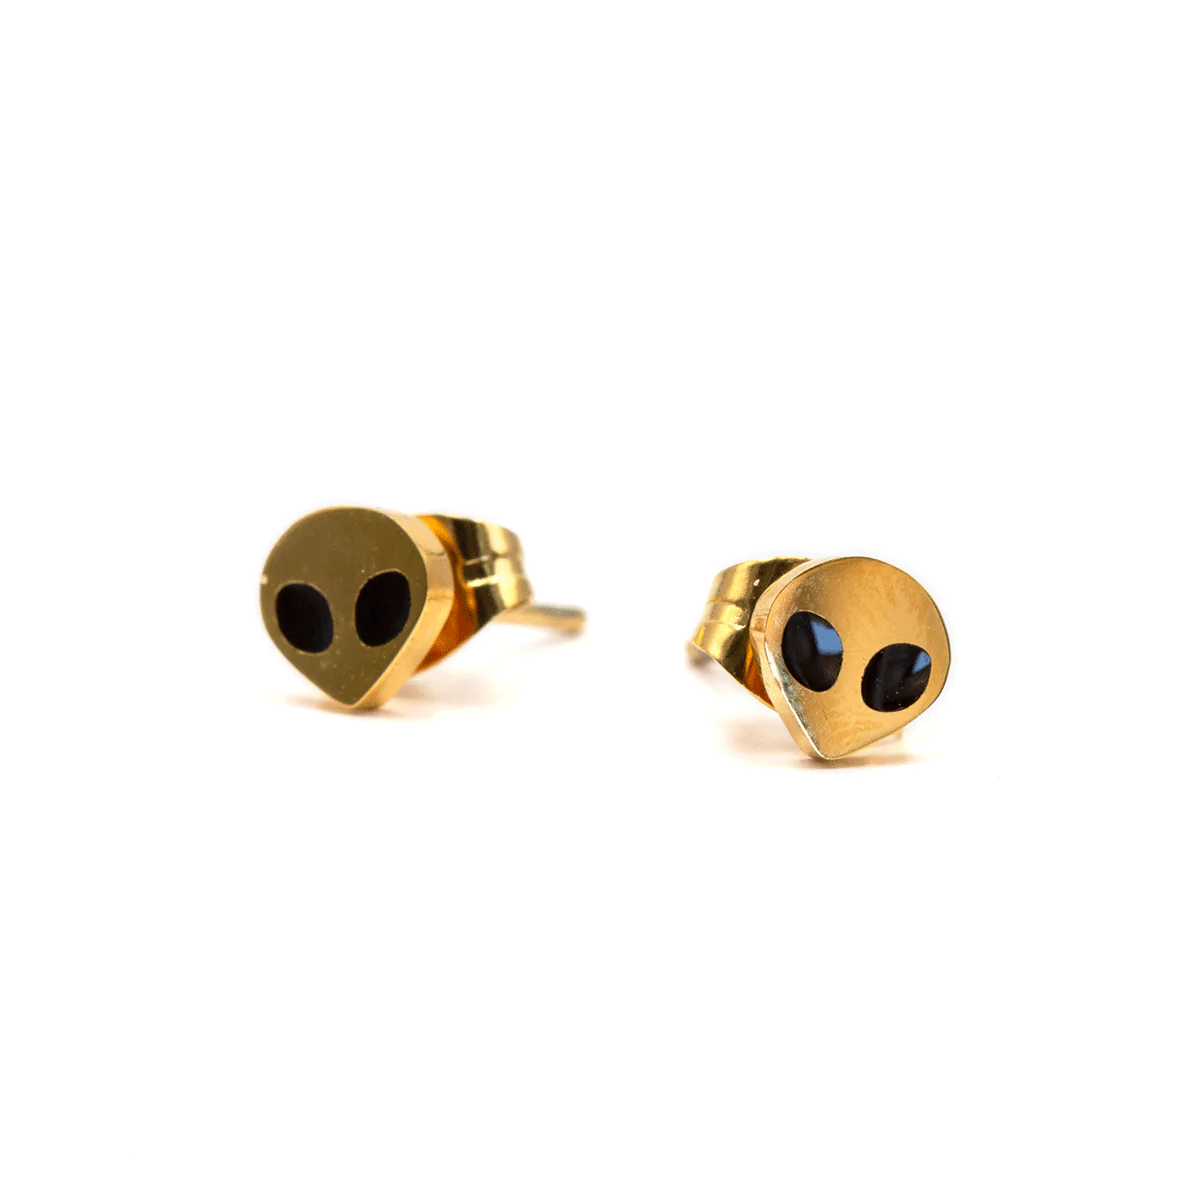 THESE ARE THINGS GOLD ALIEN MICRO STUD EARRINGS